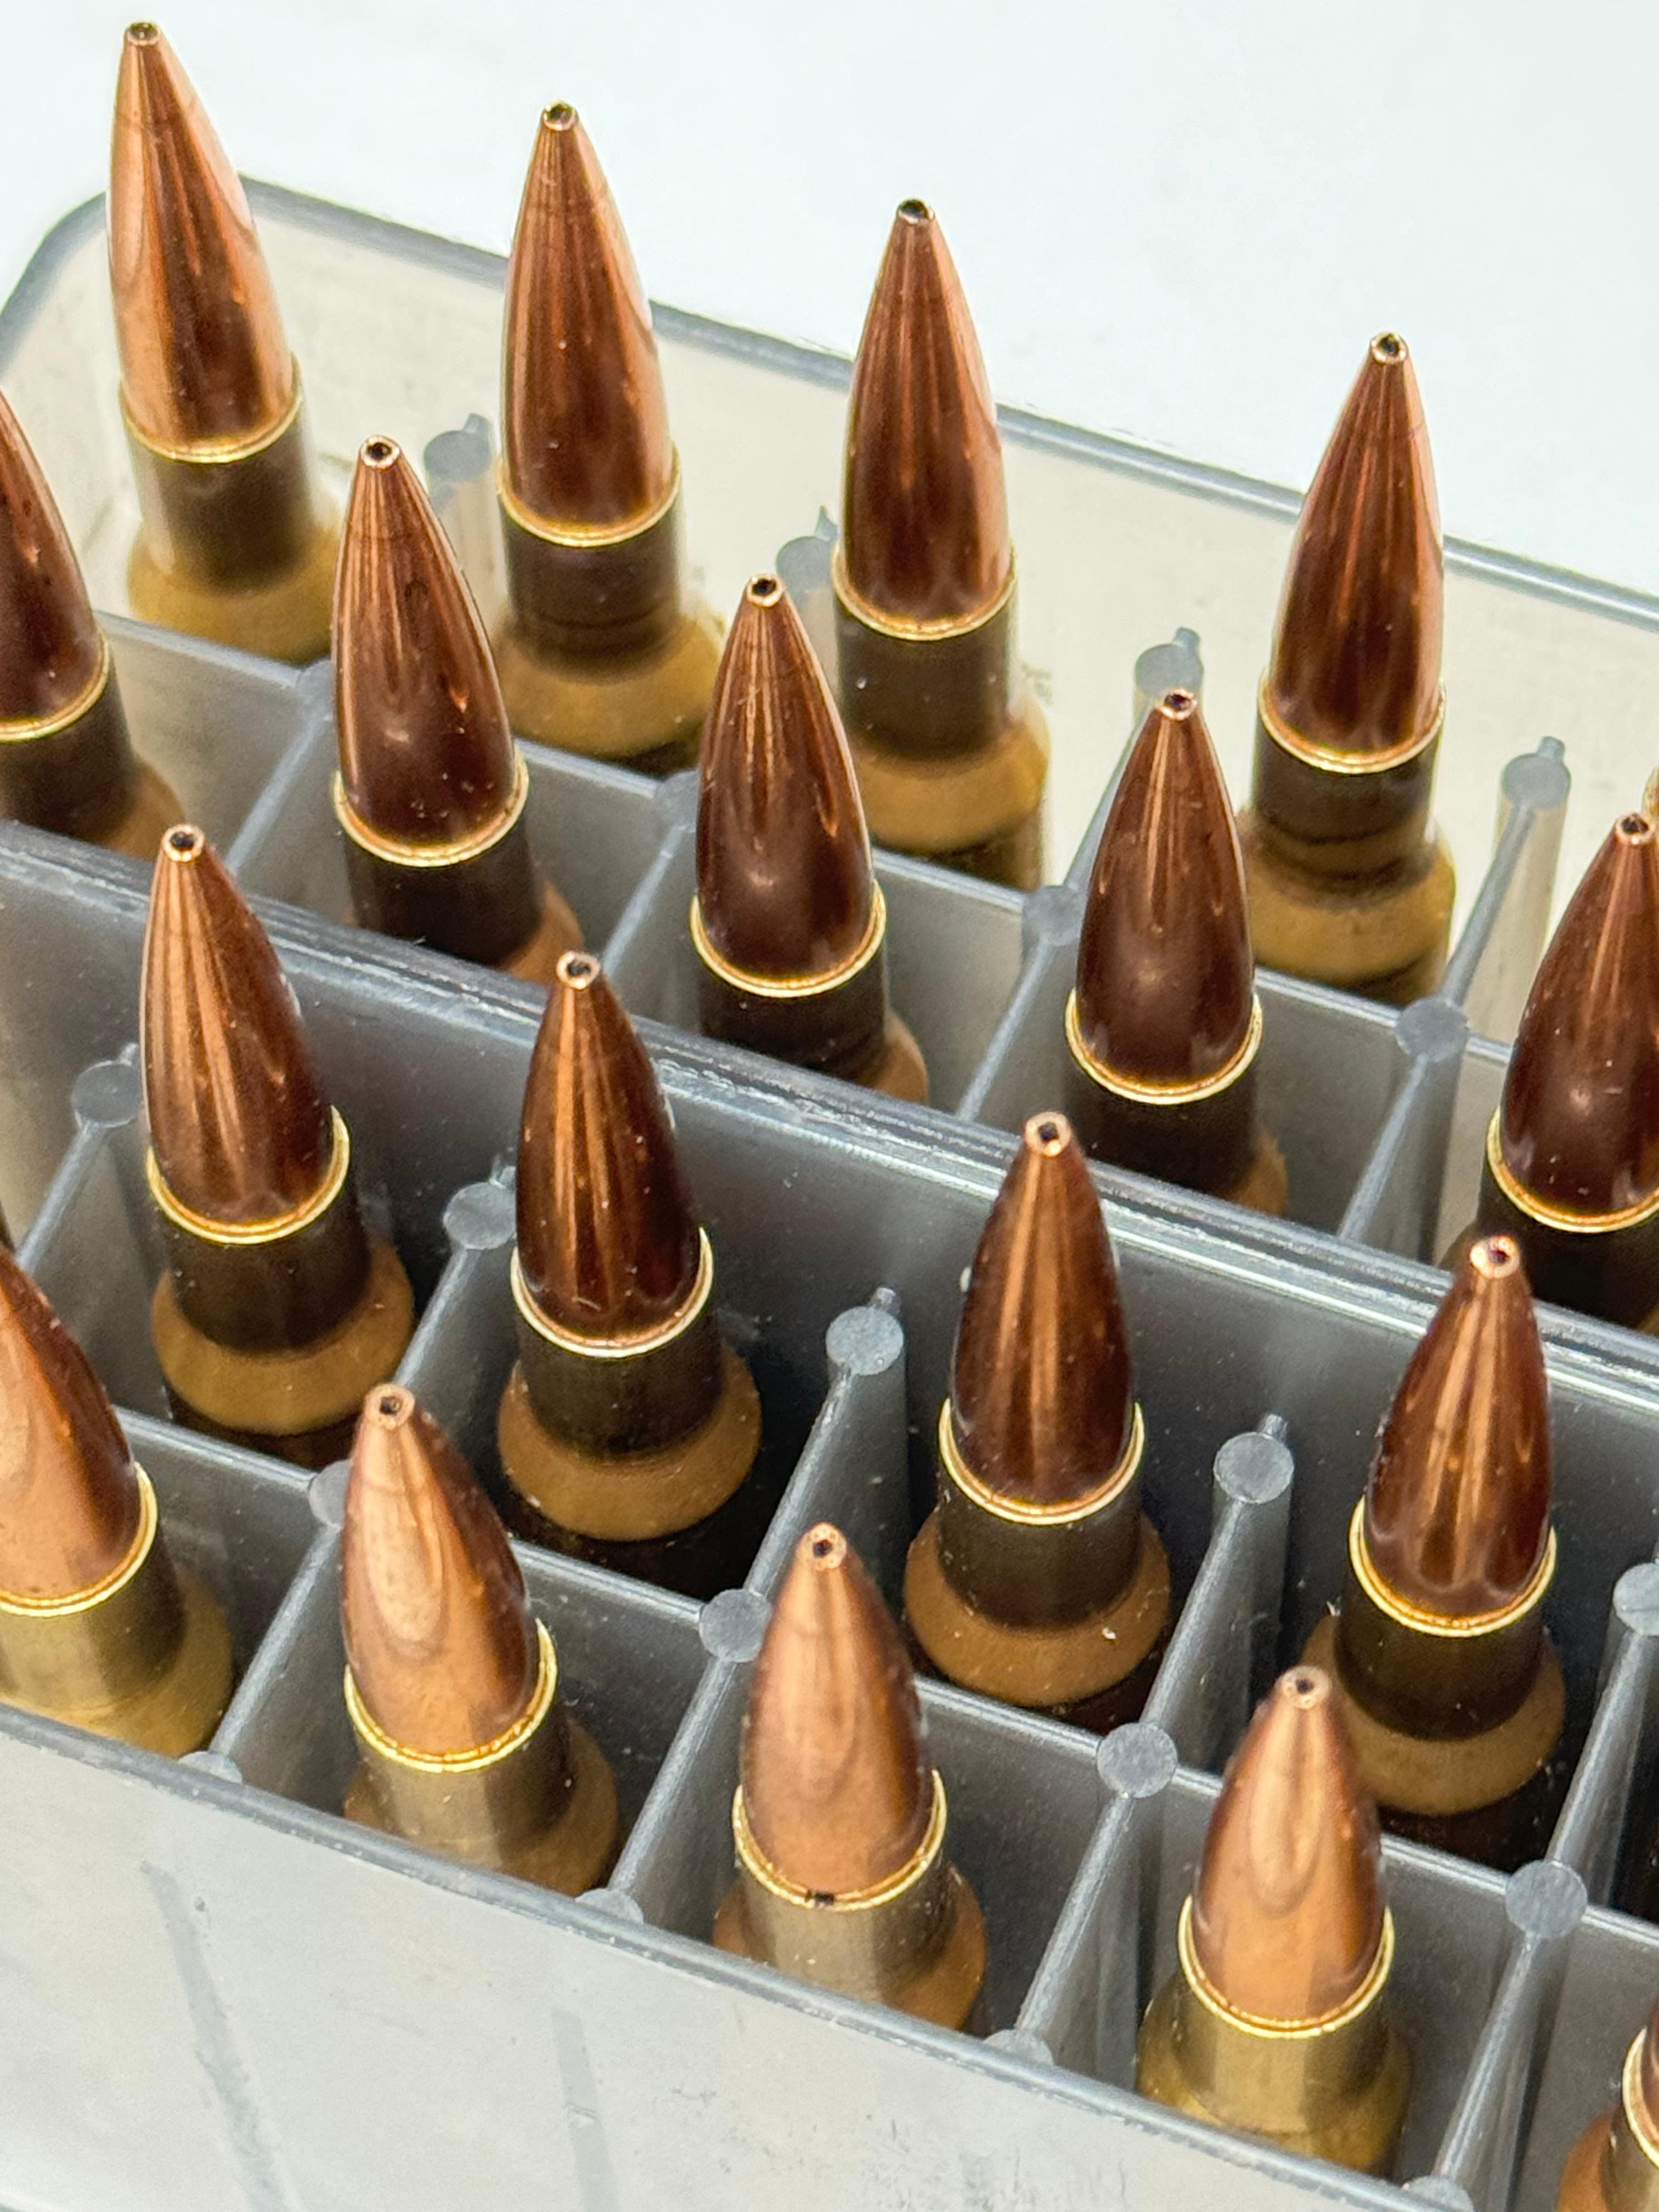 40rds. of 7MM MAUSER, 11rds. of 7mm REM MAG, and 3rds. of .338 WIN MAG Ammunition